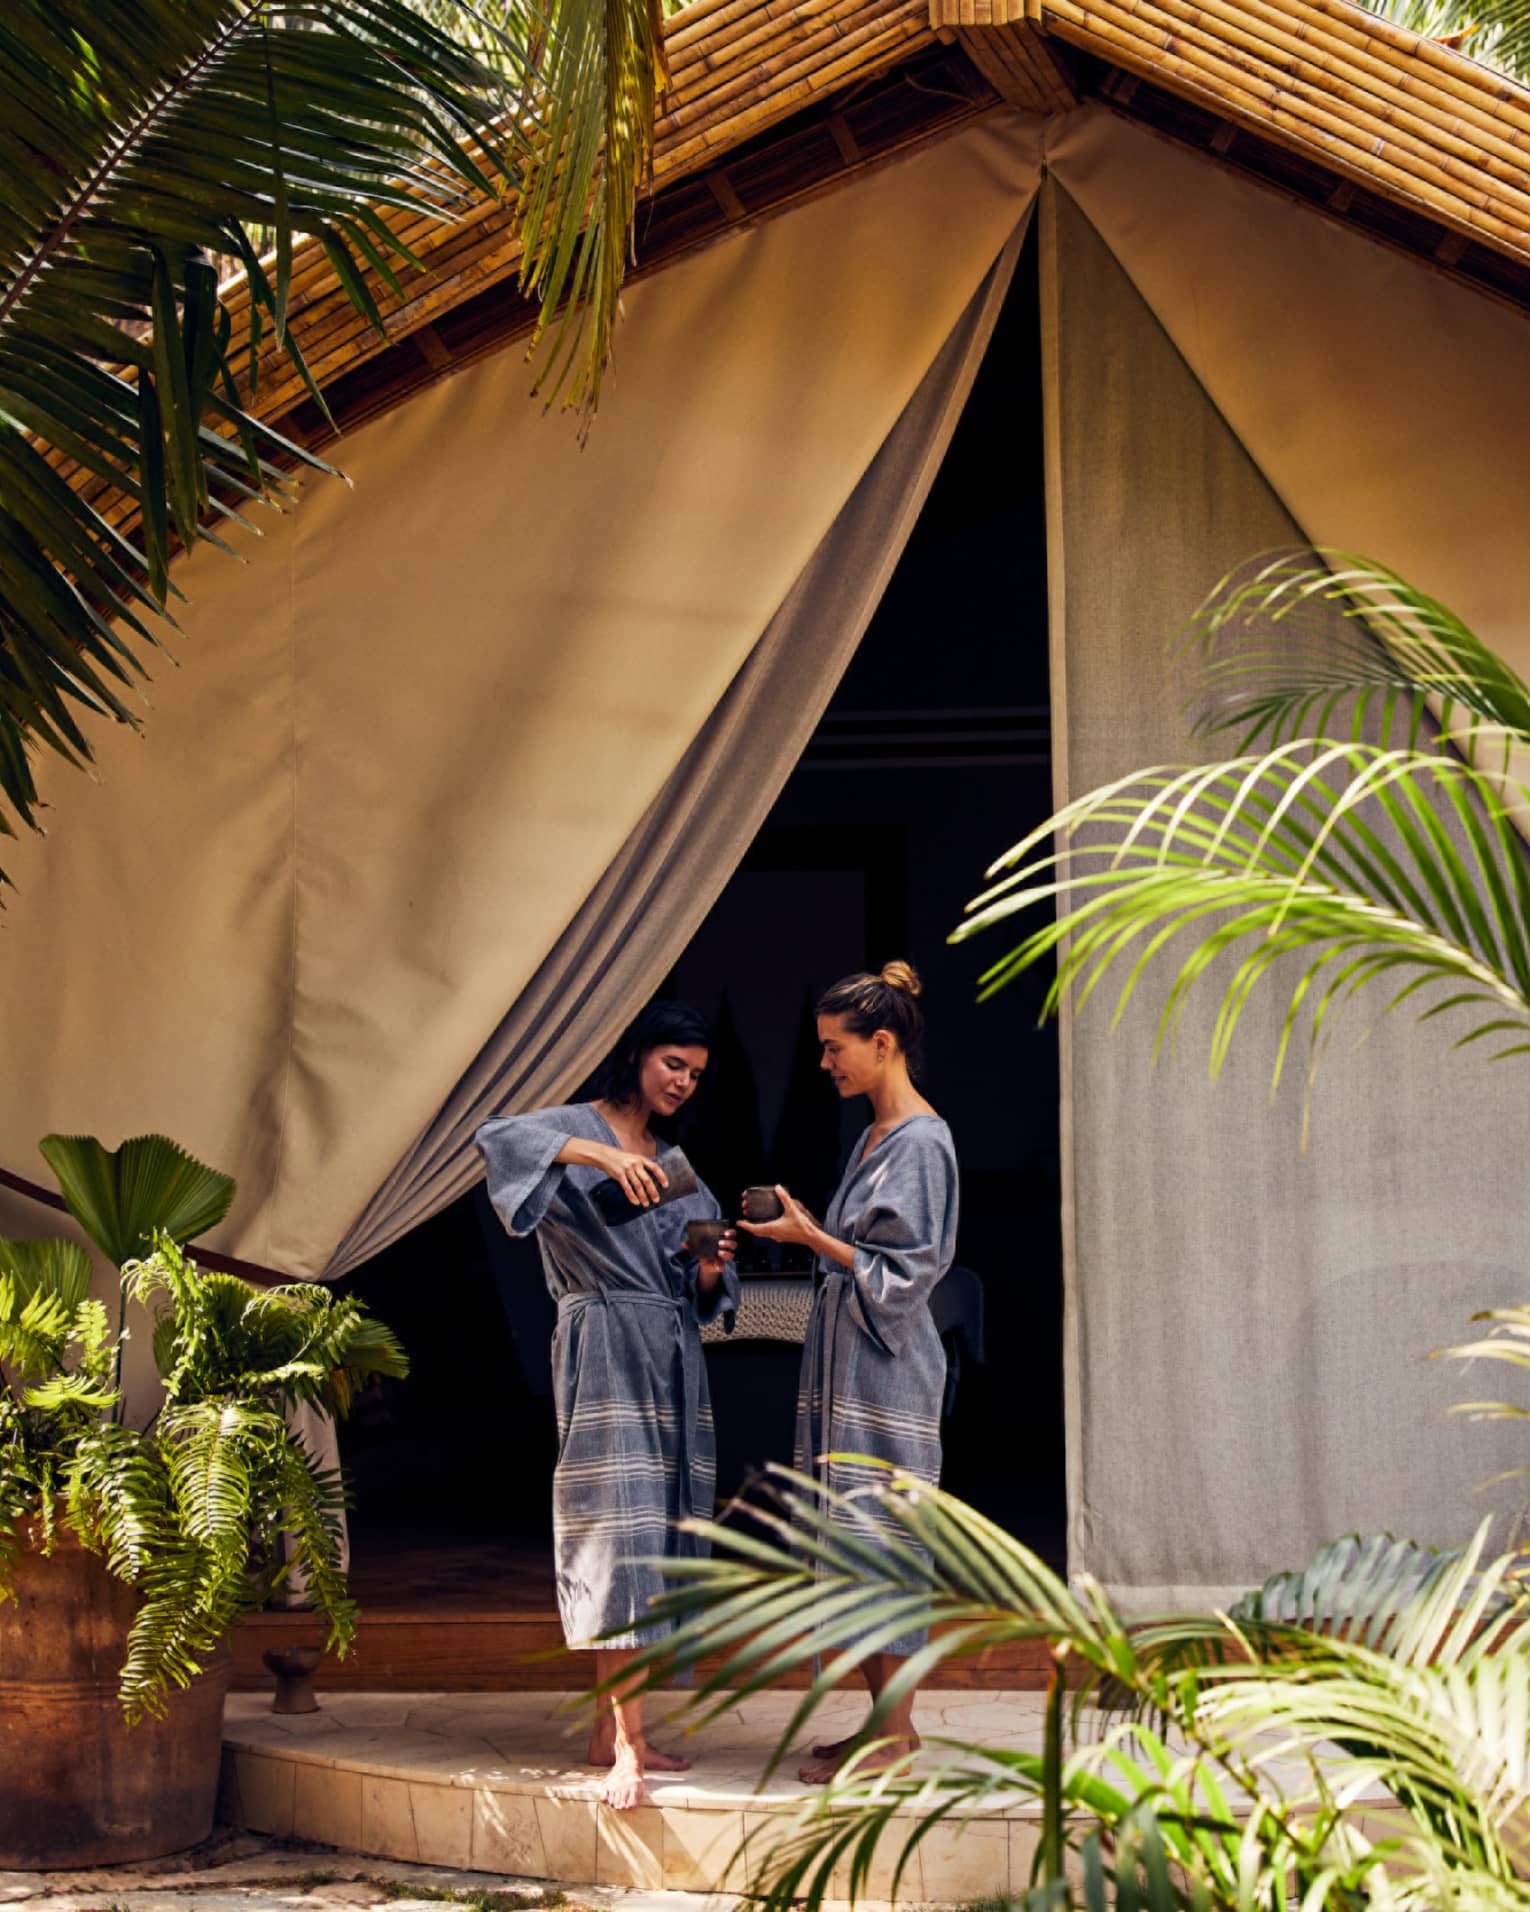 Two women in spa robes entering a spa tent surrounded by palm trees.